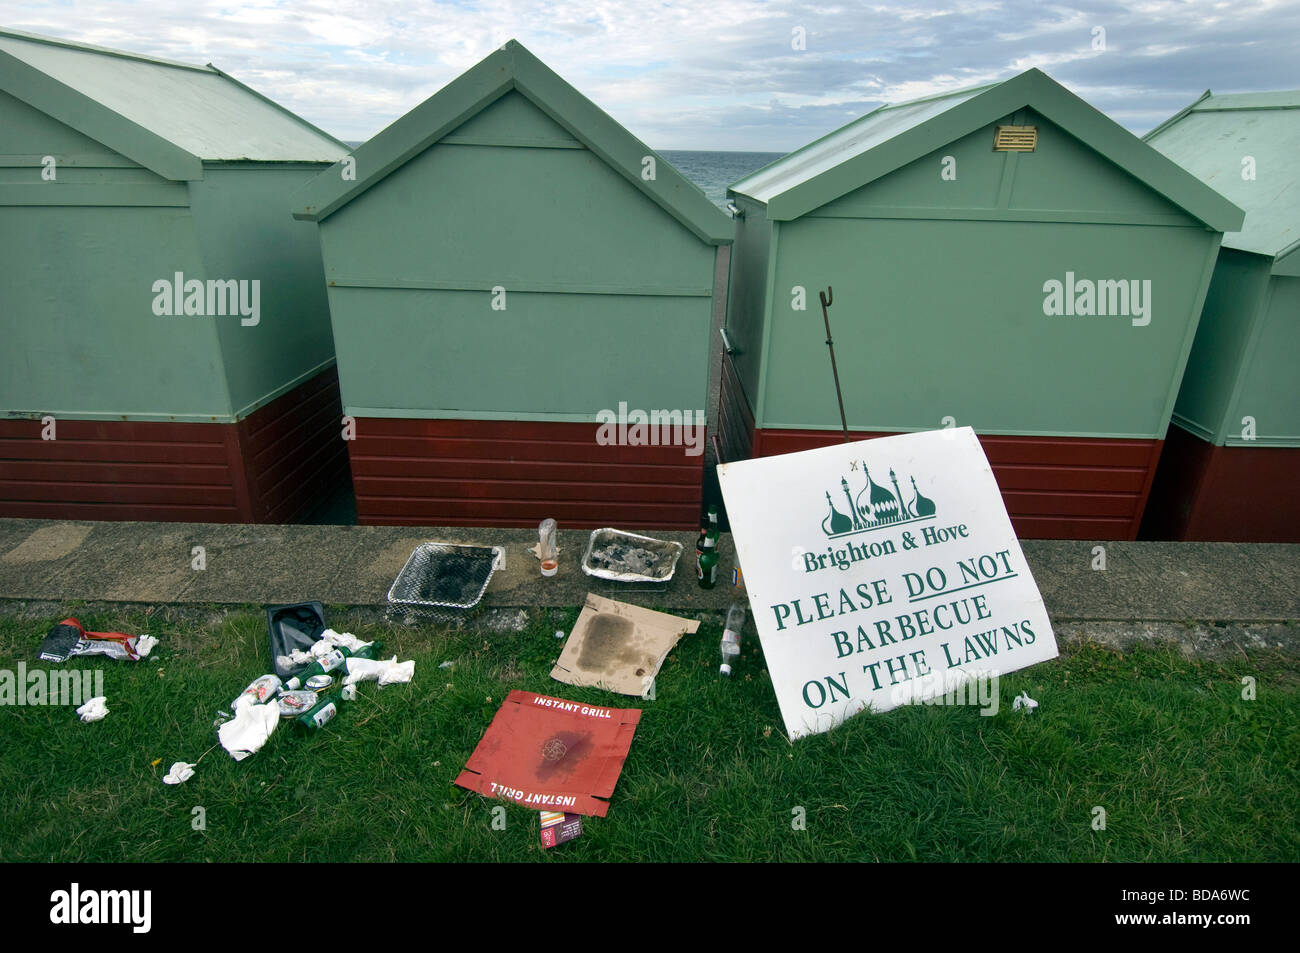 Mess and rubbish by beach huts on Hove lawns, next to a notice asking people not to  barbecue on the lawns. Stock Photo